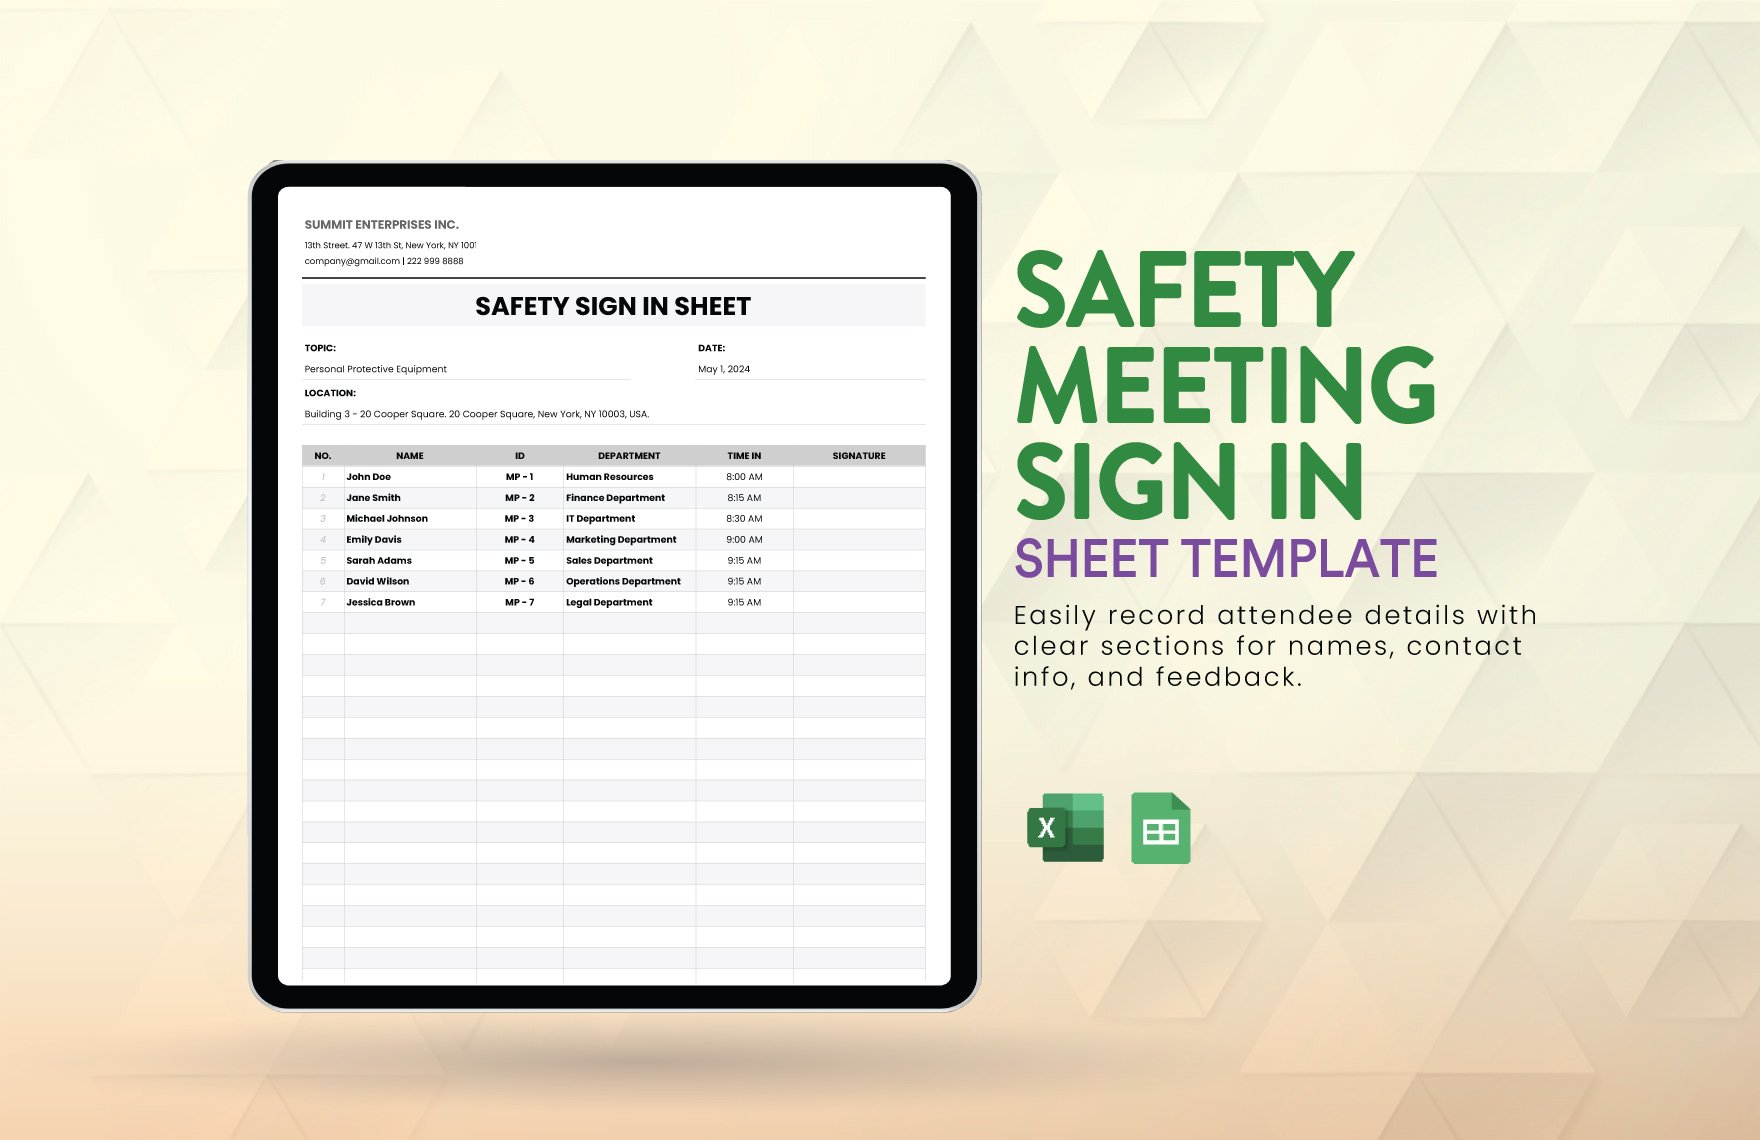 Safety Meeting Sign in Sheet Template in Excel, Google Sheets